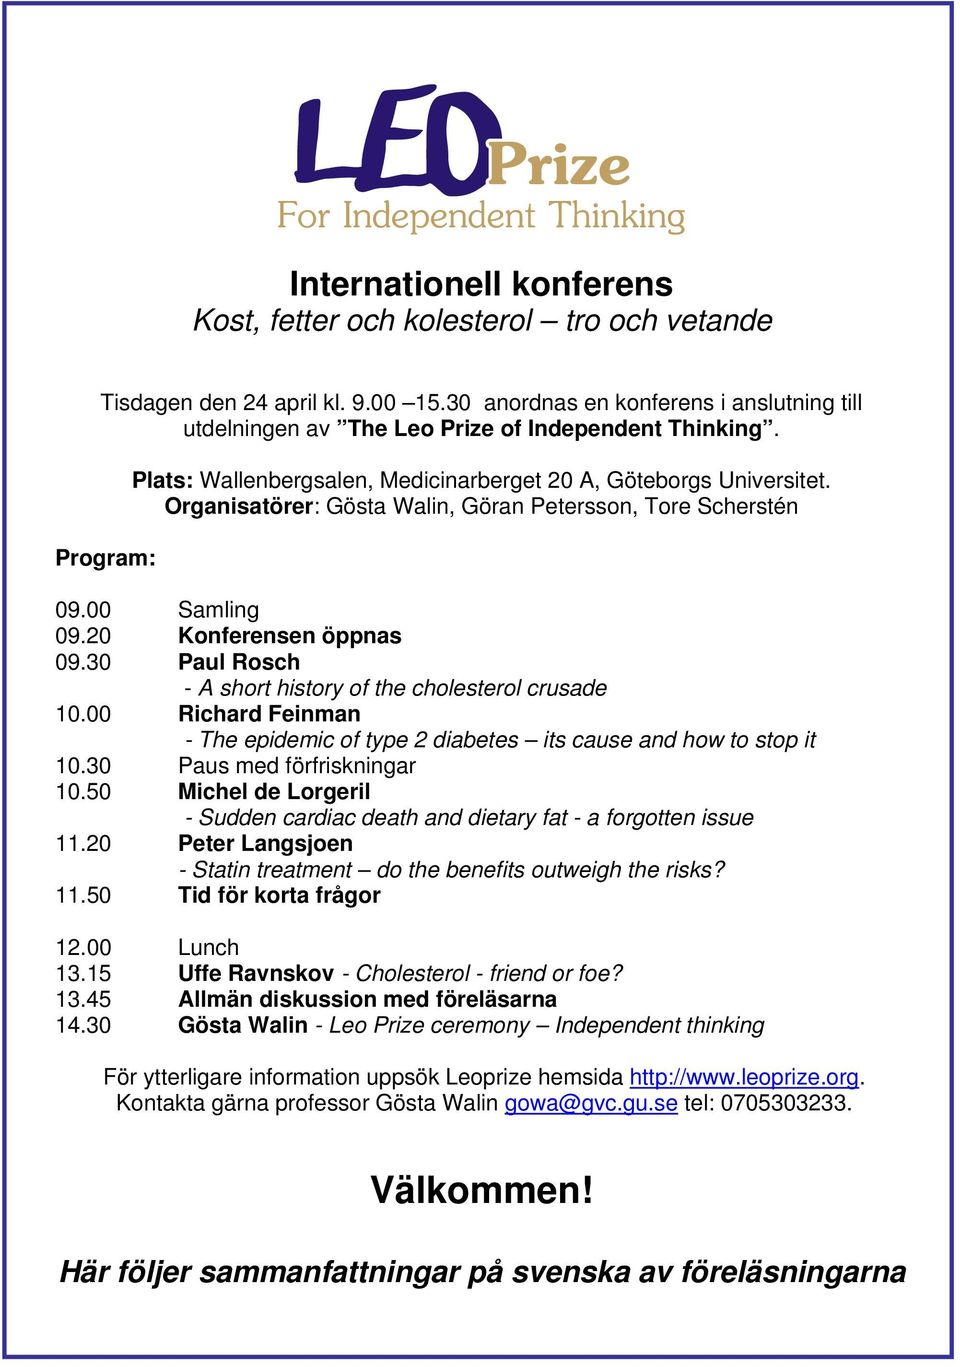 30 Paul Rosch - A short history of the cholesterol crusade 10.00 Richard Feinman - The epidemic of type 2 diabetes its cause and how to stop it 10.30 Paus med förfriskningar 10.